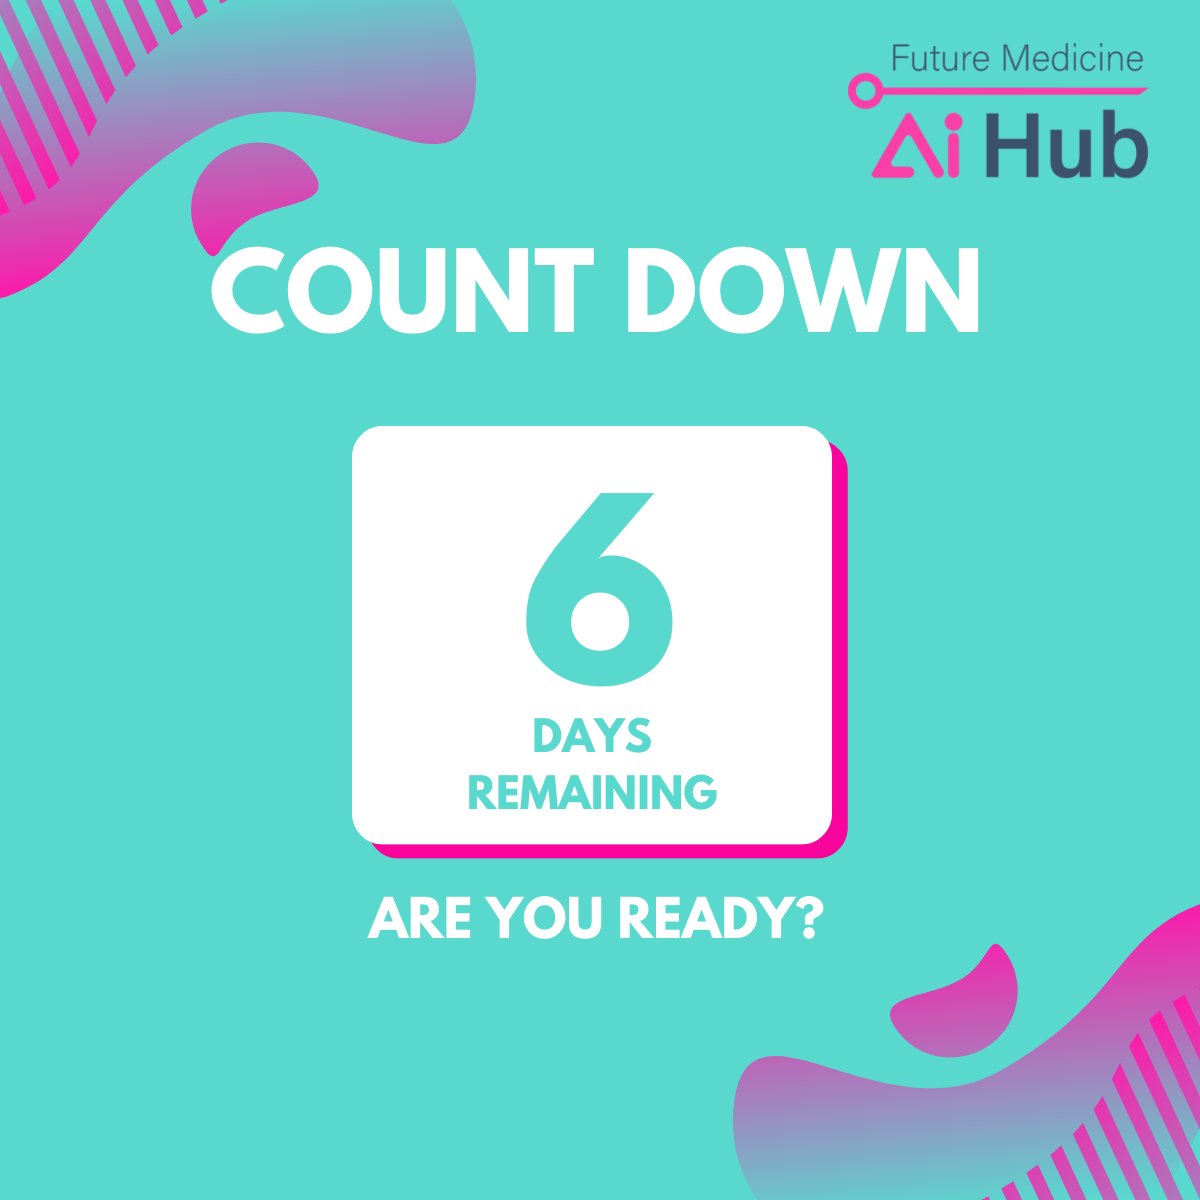 6 days and counting until our exciting #FMAI launch! Pre-register to become a member and get early access to the latest AI resources: bit.ly/3JyB7ap

#ArtificialIntelligence #AIinMedicine #AItechnology #AIresearch #VirtualHealth #VirtualHealthcare #HealthTech